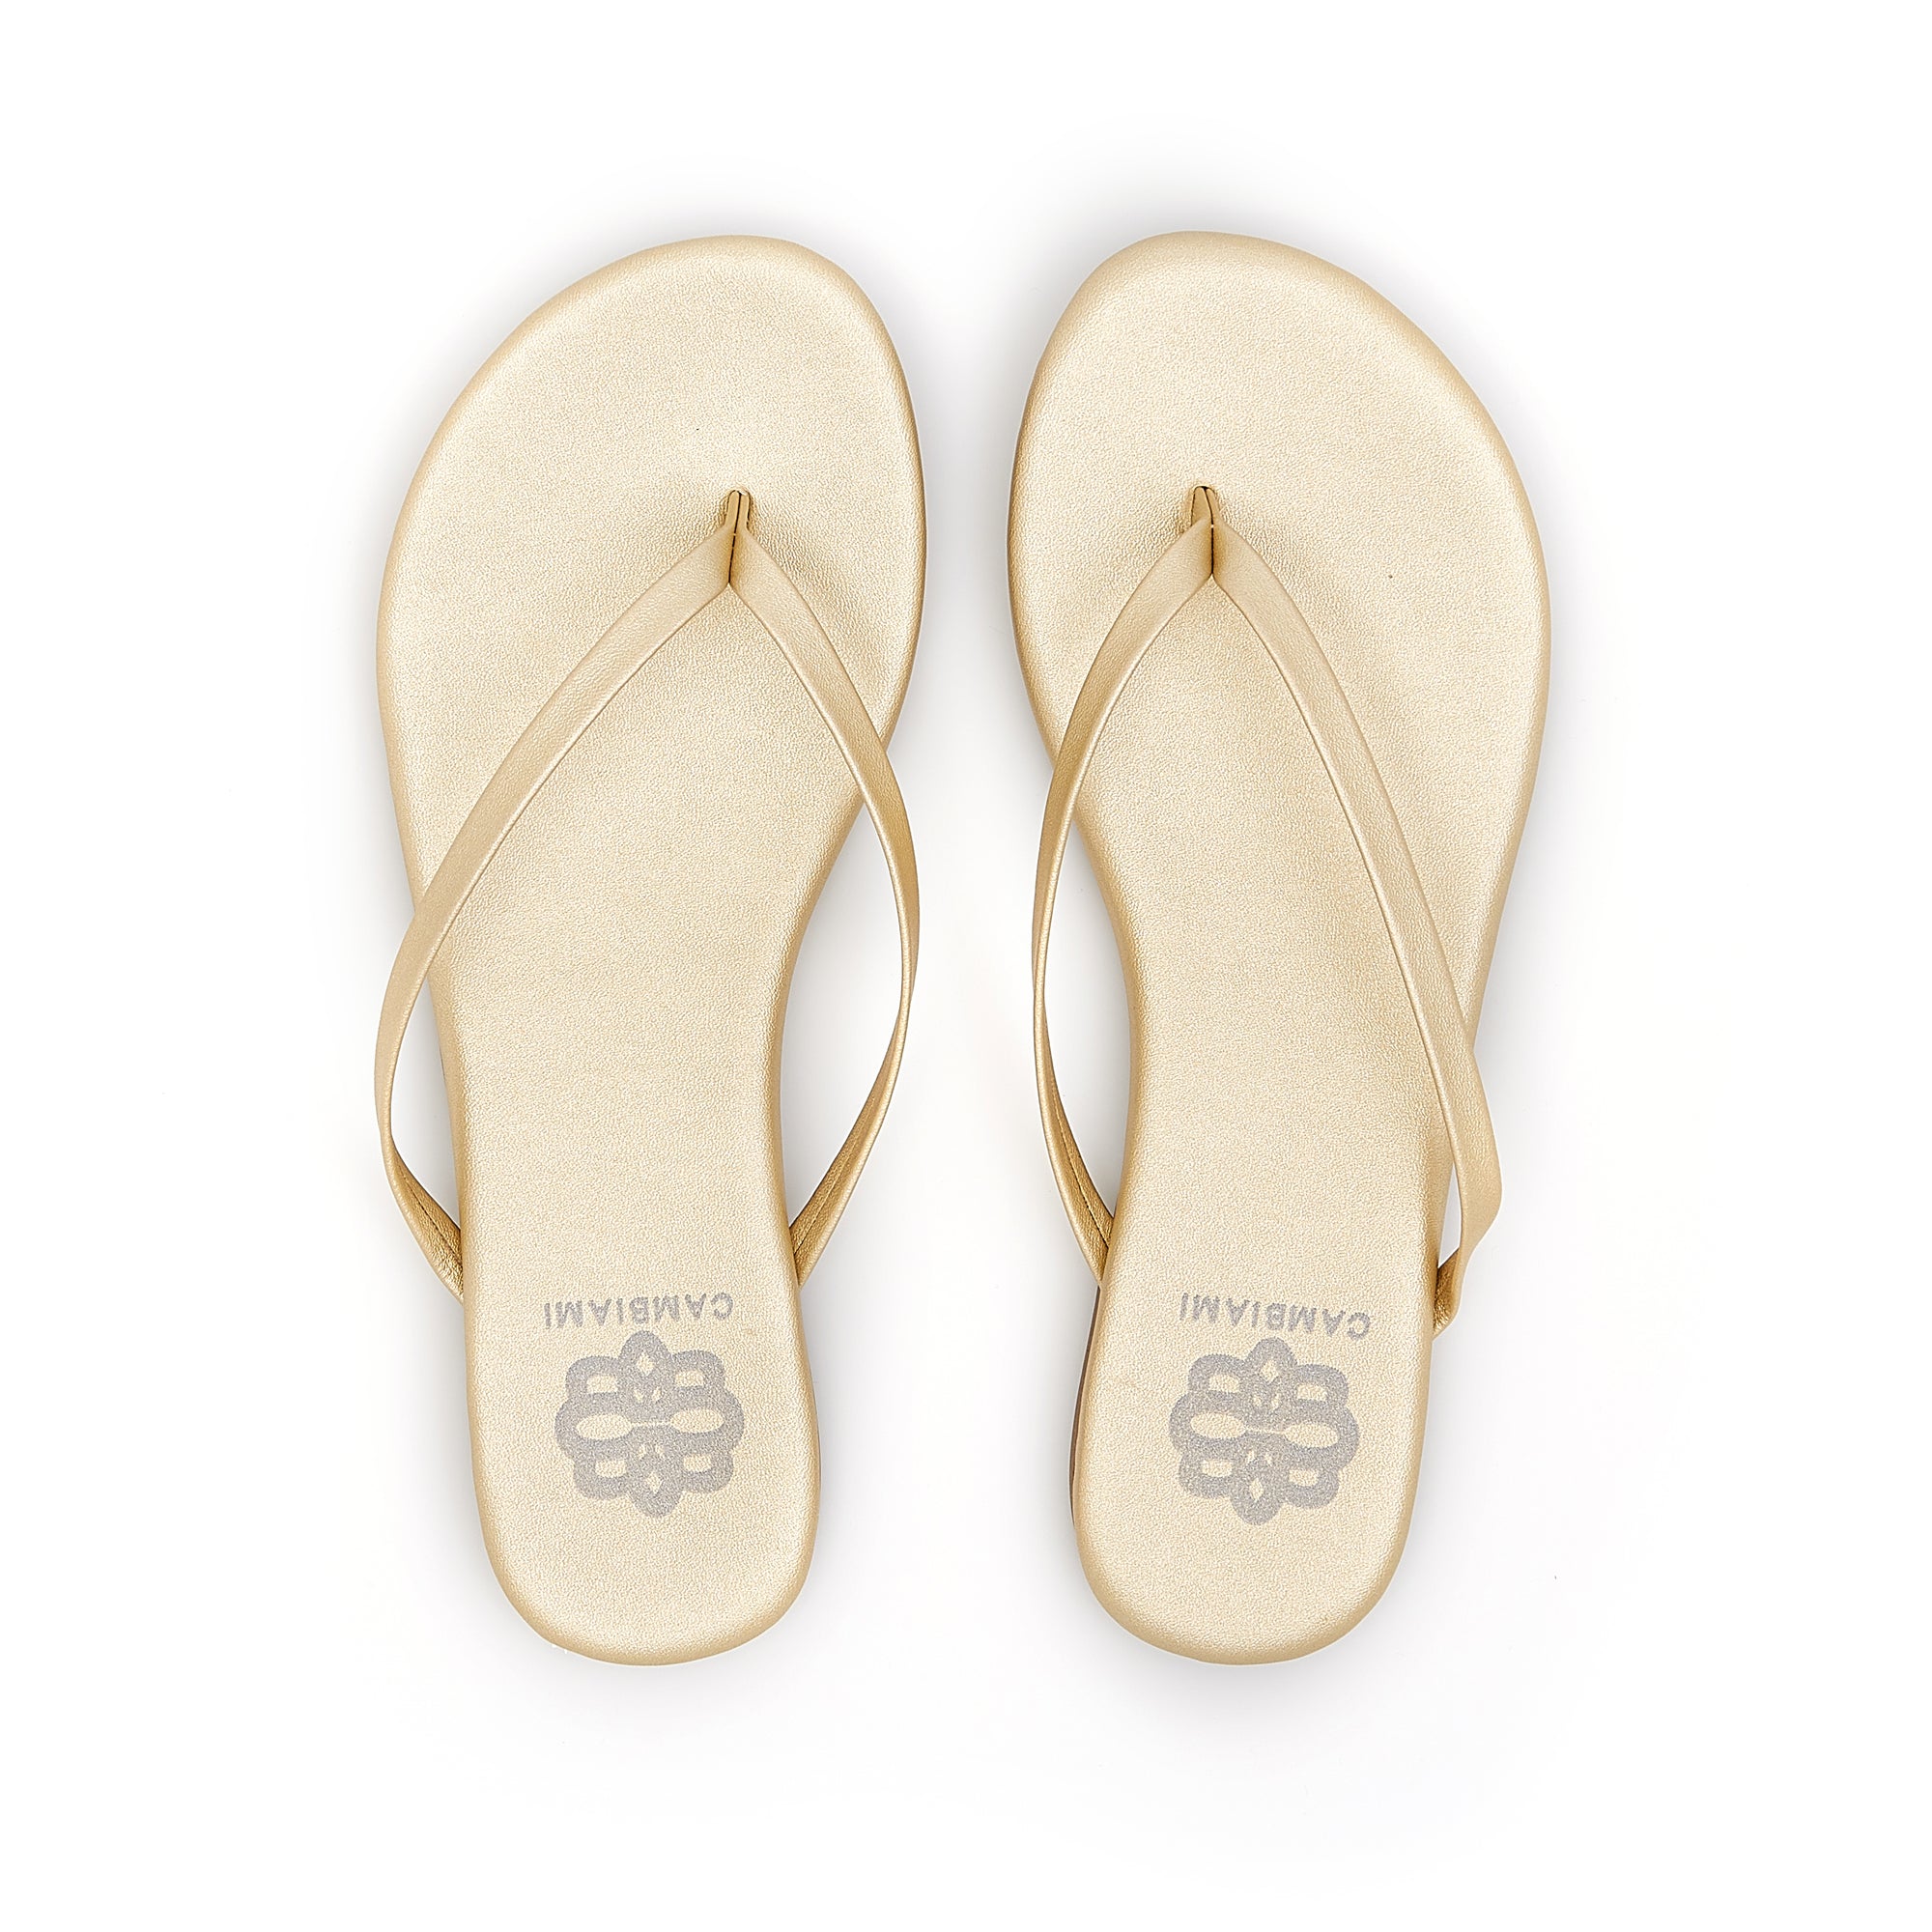 TKEES Flip Flops Review: These are Sandals a Flop